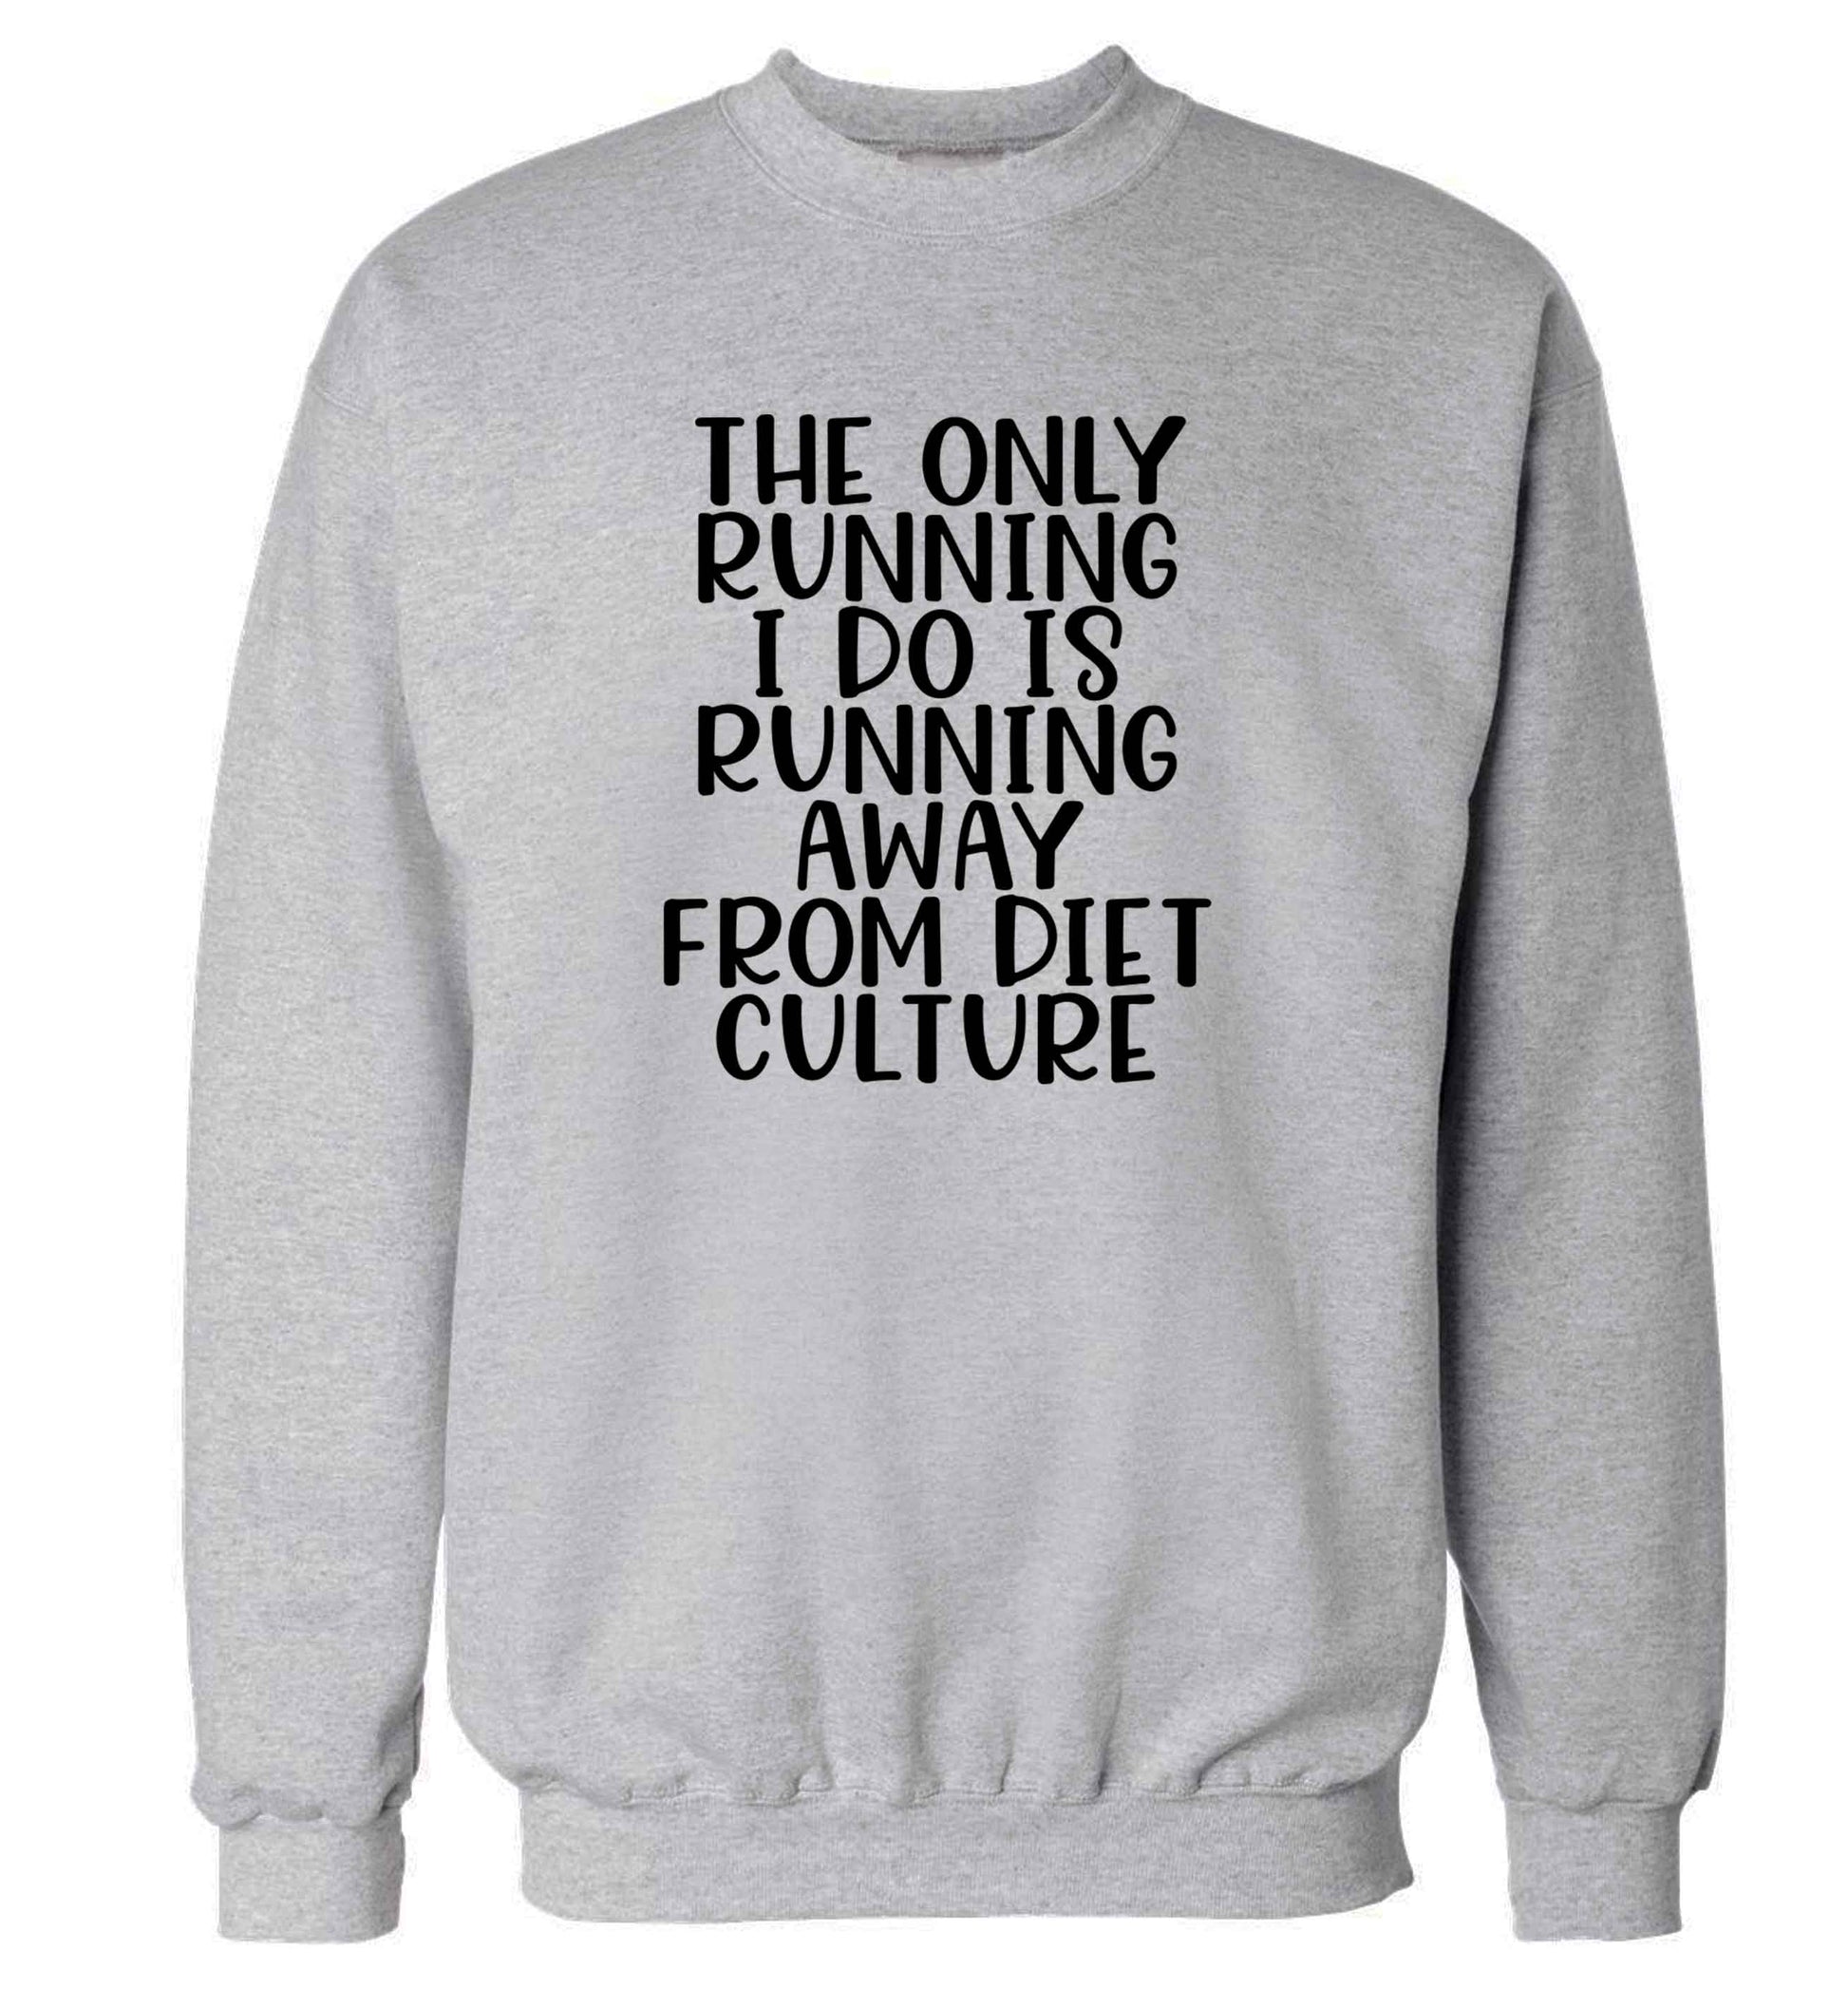 The only running I do is running away from diet culture adult's unisex grey sweater 2XL